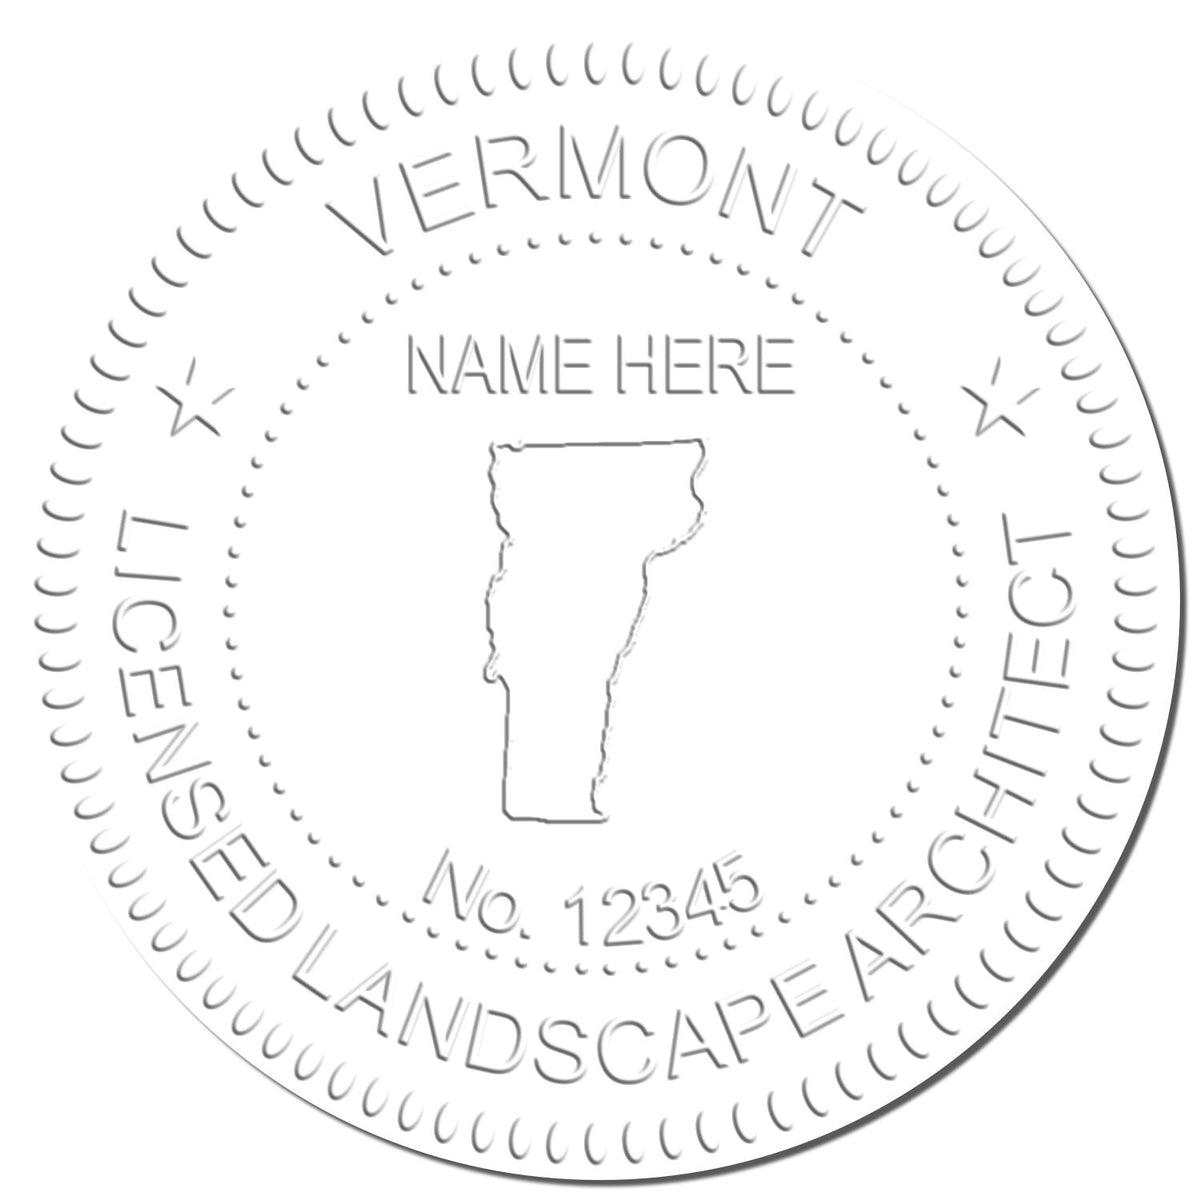 This paper is stamped with a sample imprint of the Gift Vermont Landscape Architect Seal, signifying its quality and reliability.